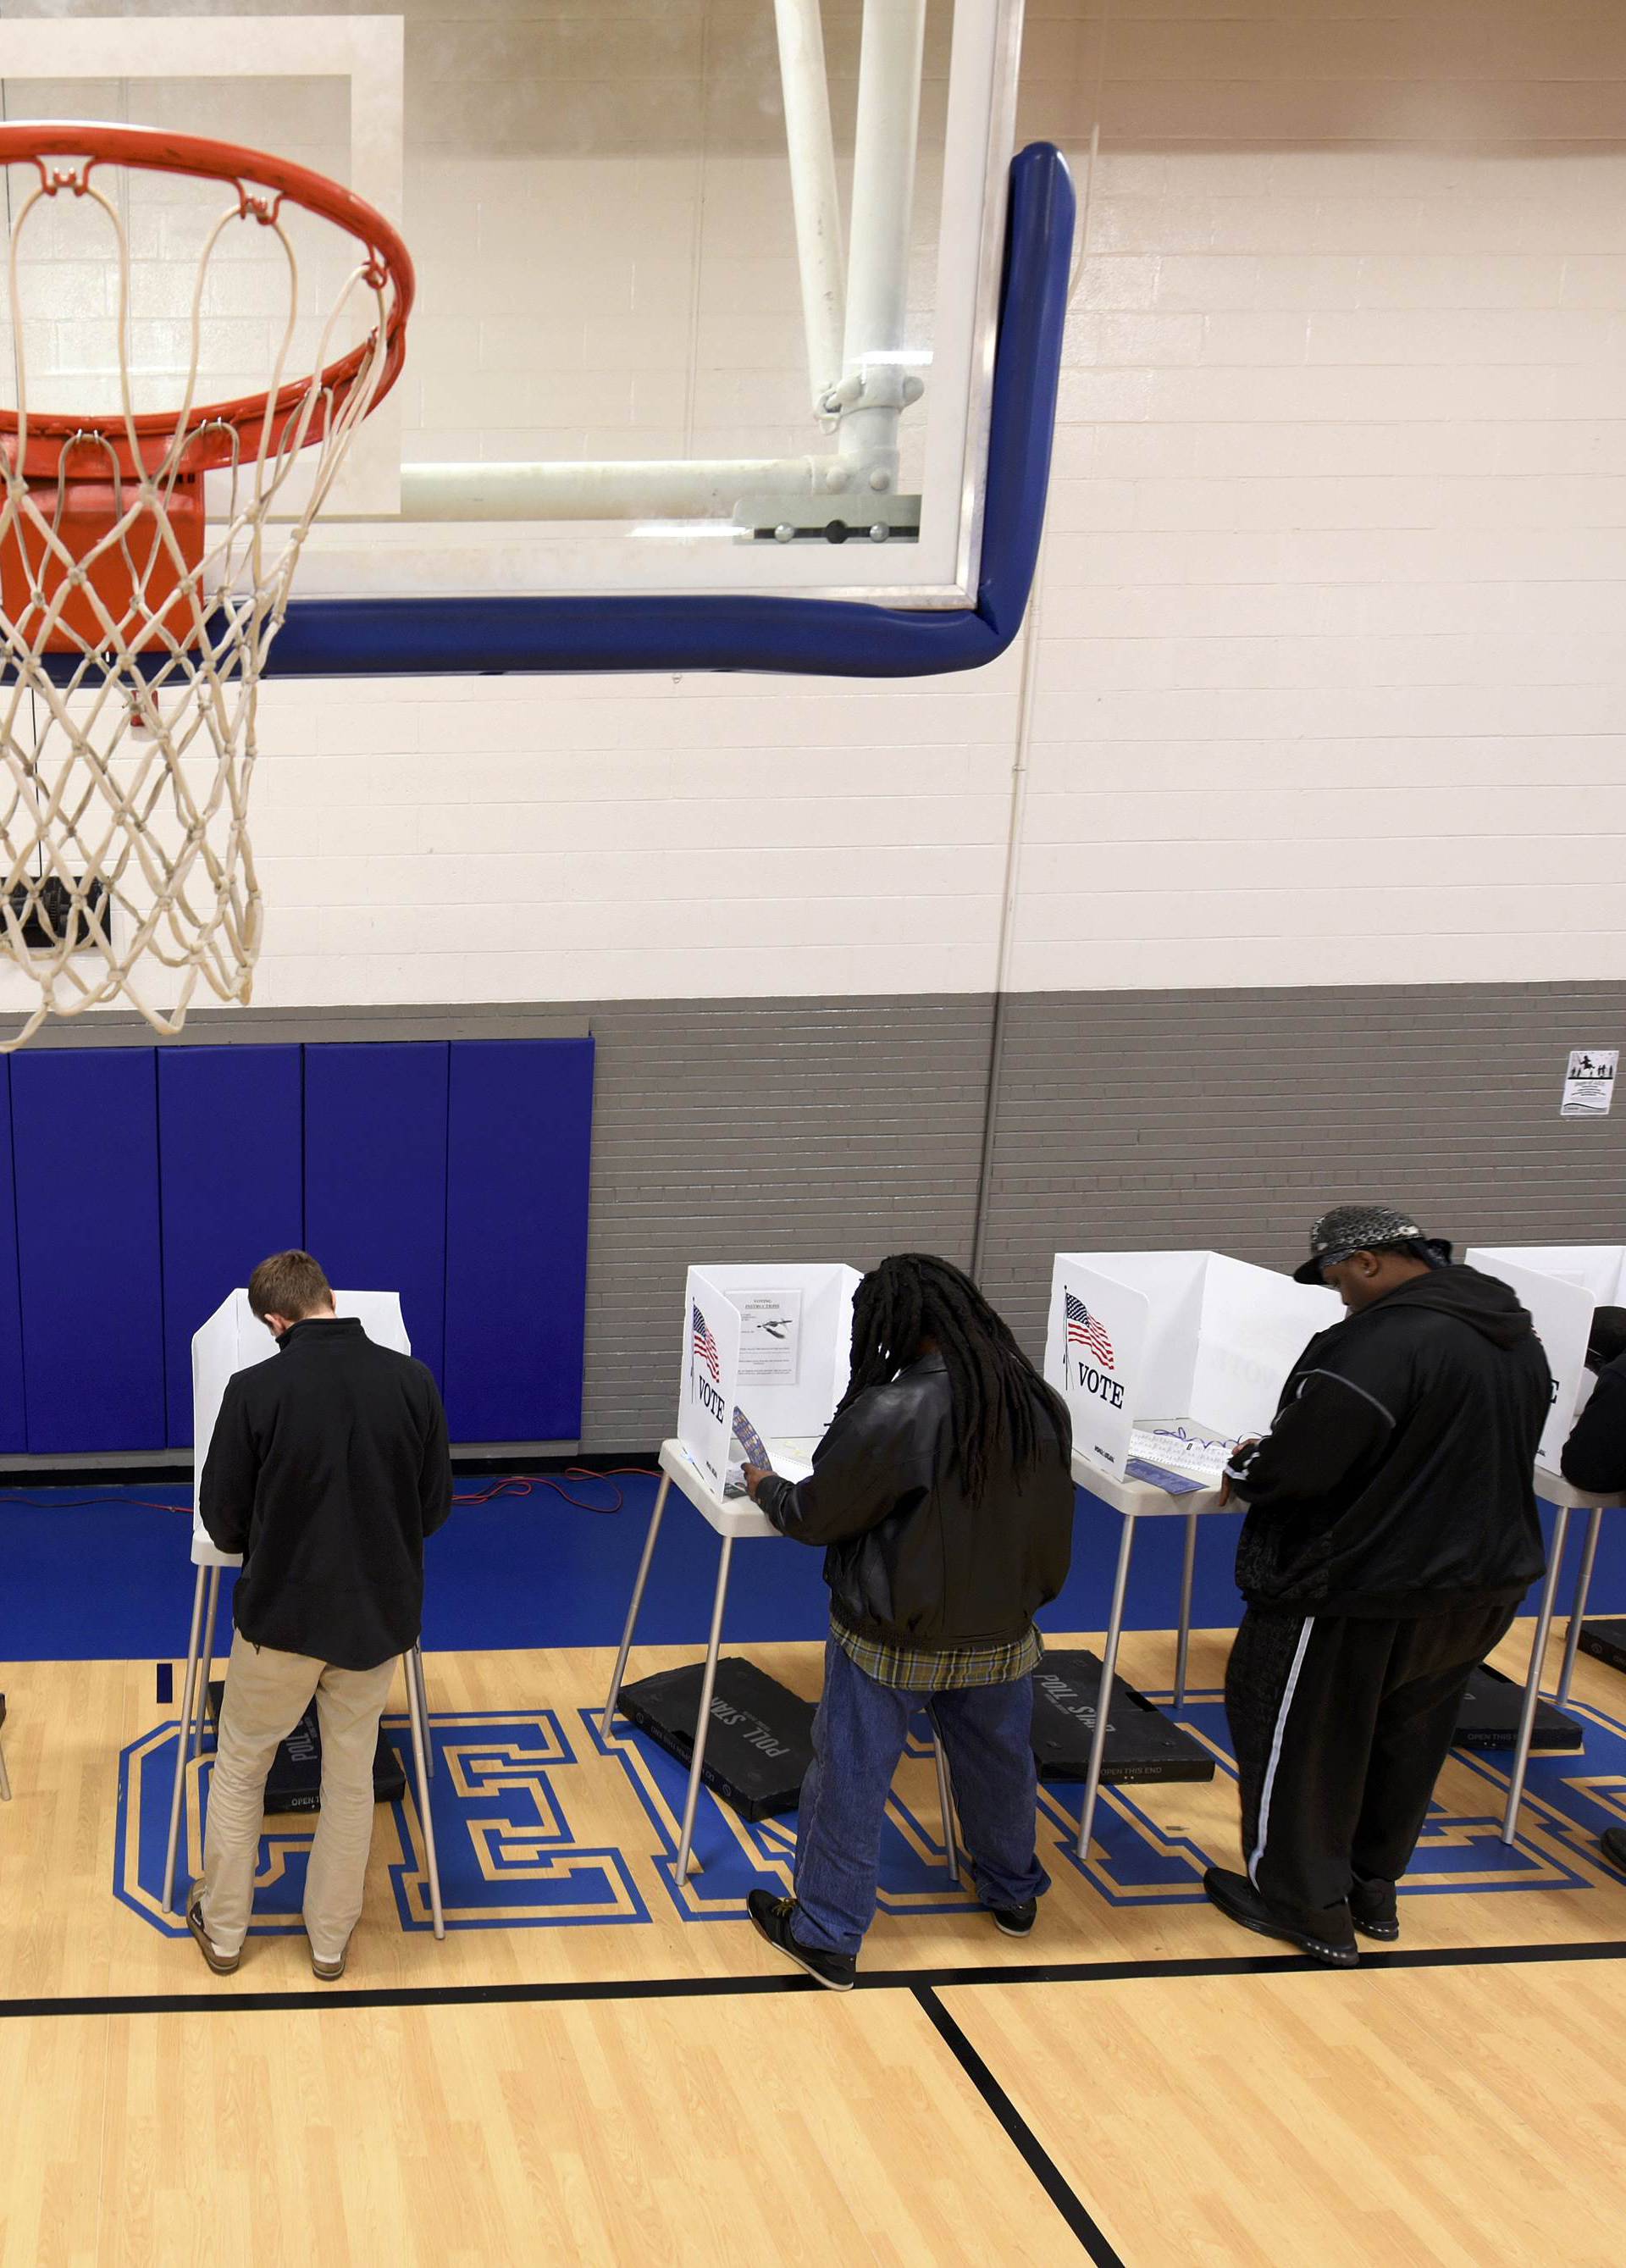 Citizens vote on a basketball court at a recreation center during the U.S. general election in Greenville, North Carolina